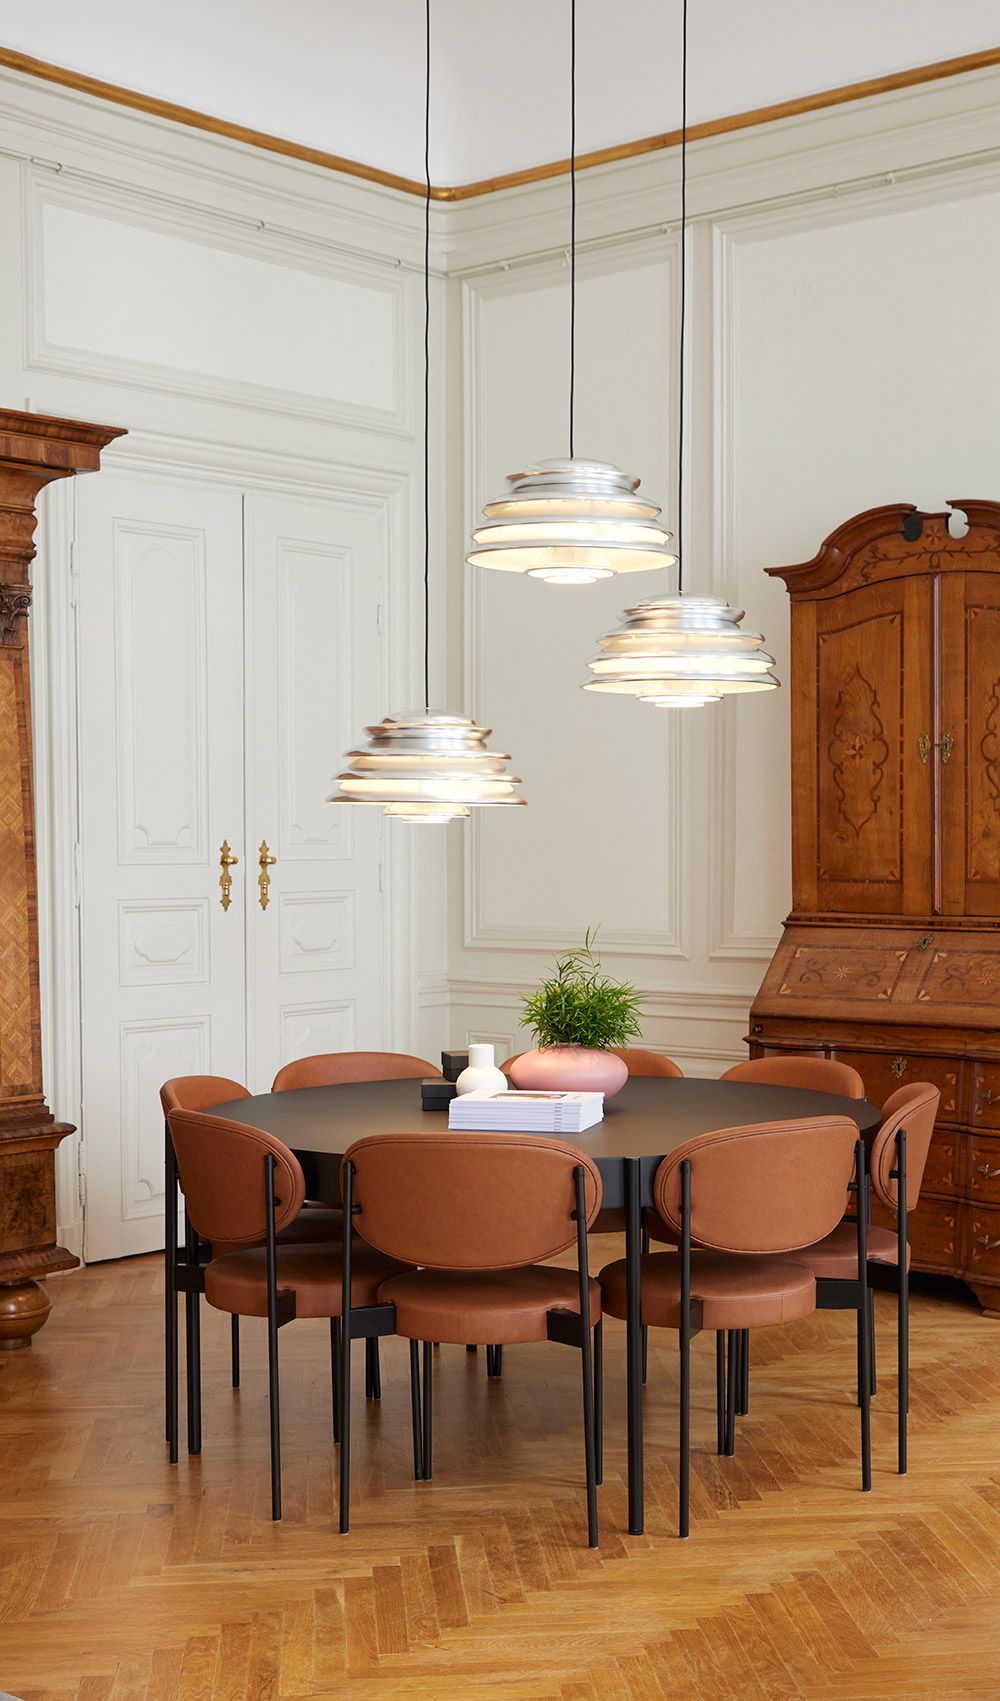 Hive Lamp & Stacking Chair - Verpan Indretning